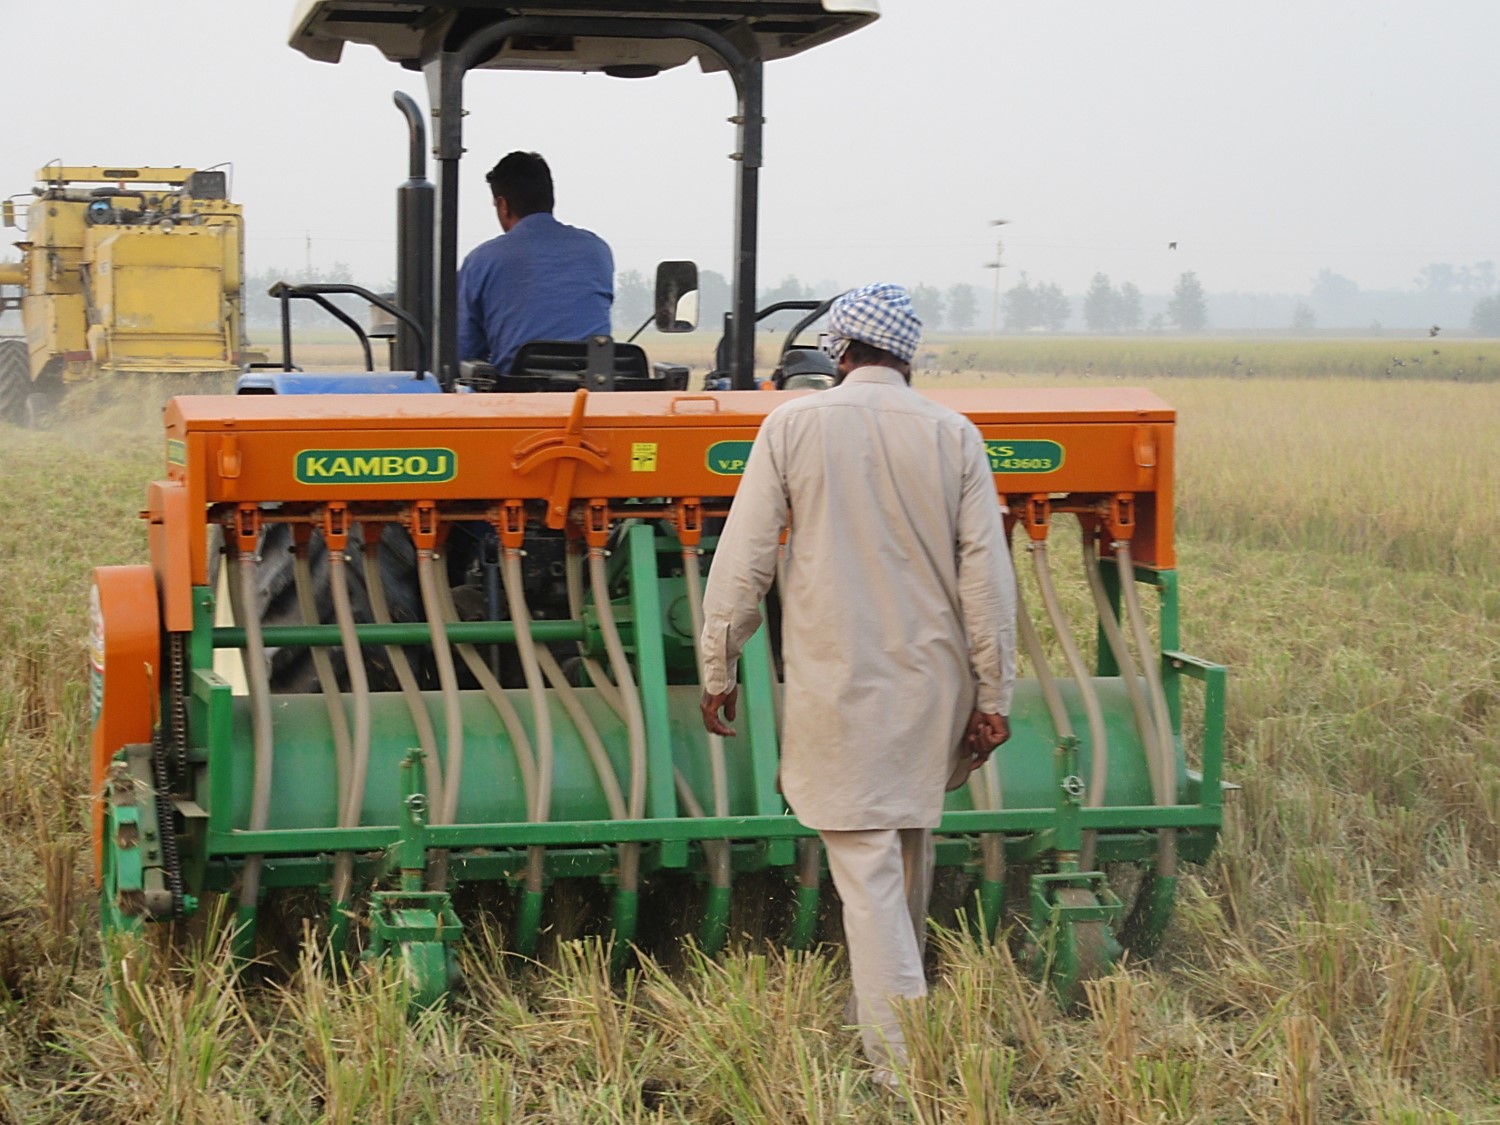 Direct sowing of wheat seed into a recently-harvested rice field using the “Happy Seeder” implement, a cost-effective and eco-friendly alternative to burning rice straw, in northern India. (Photo: BISA/Love Kumar Singh)